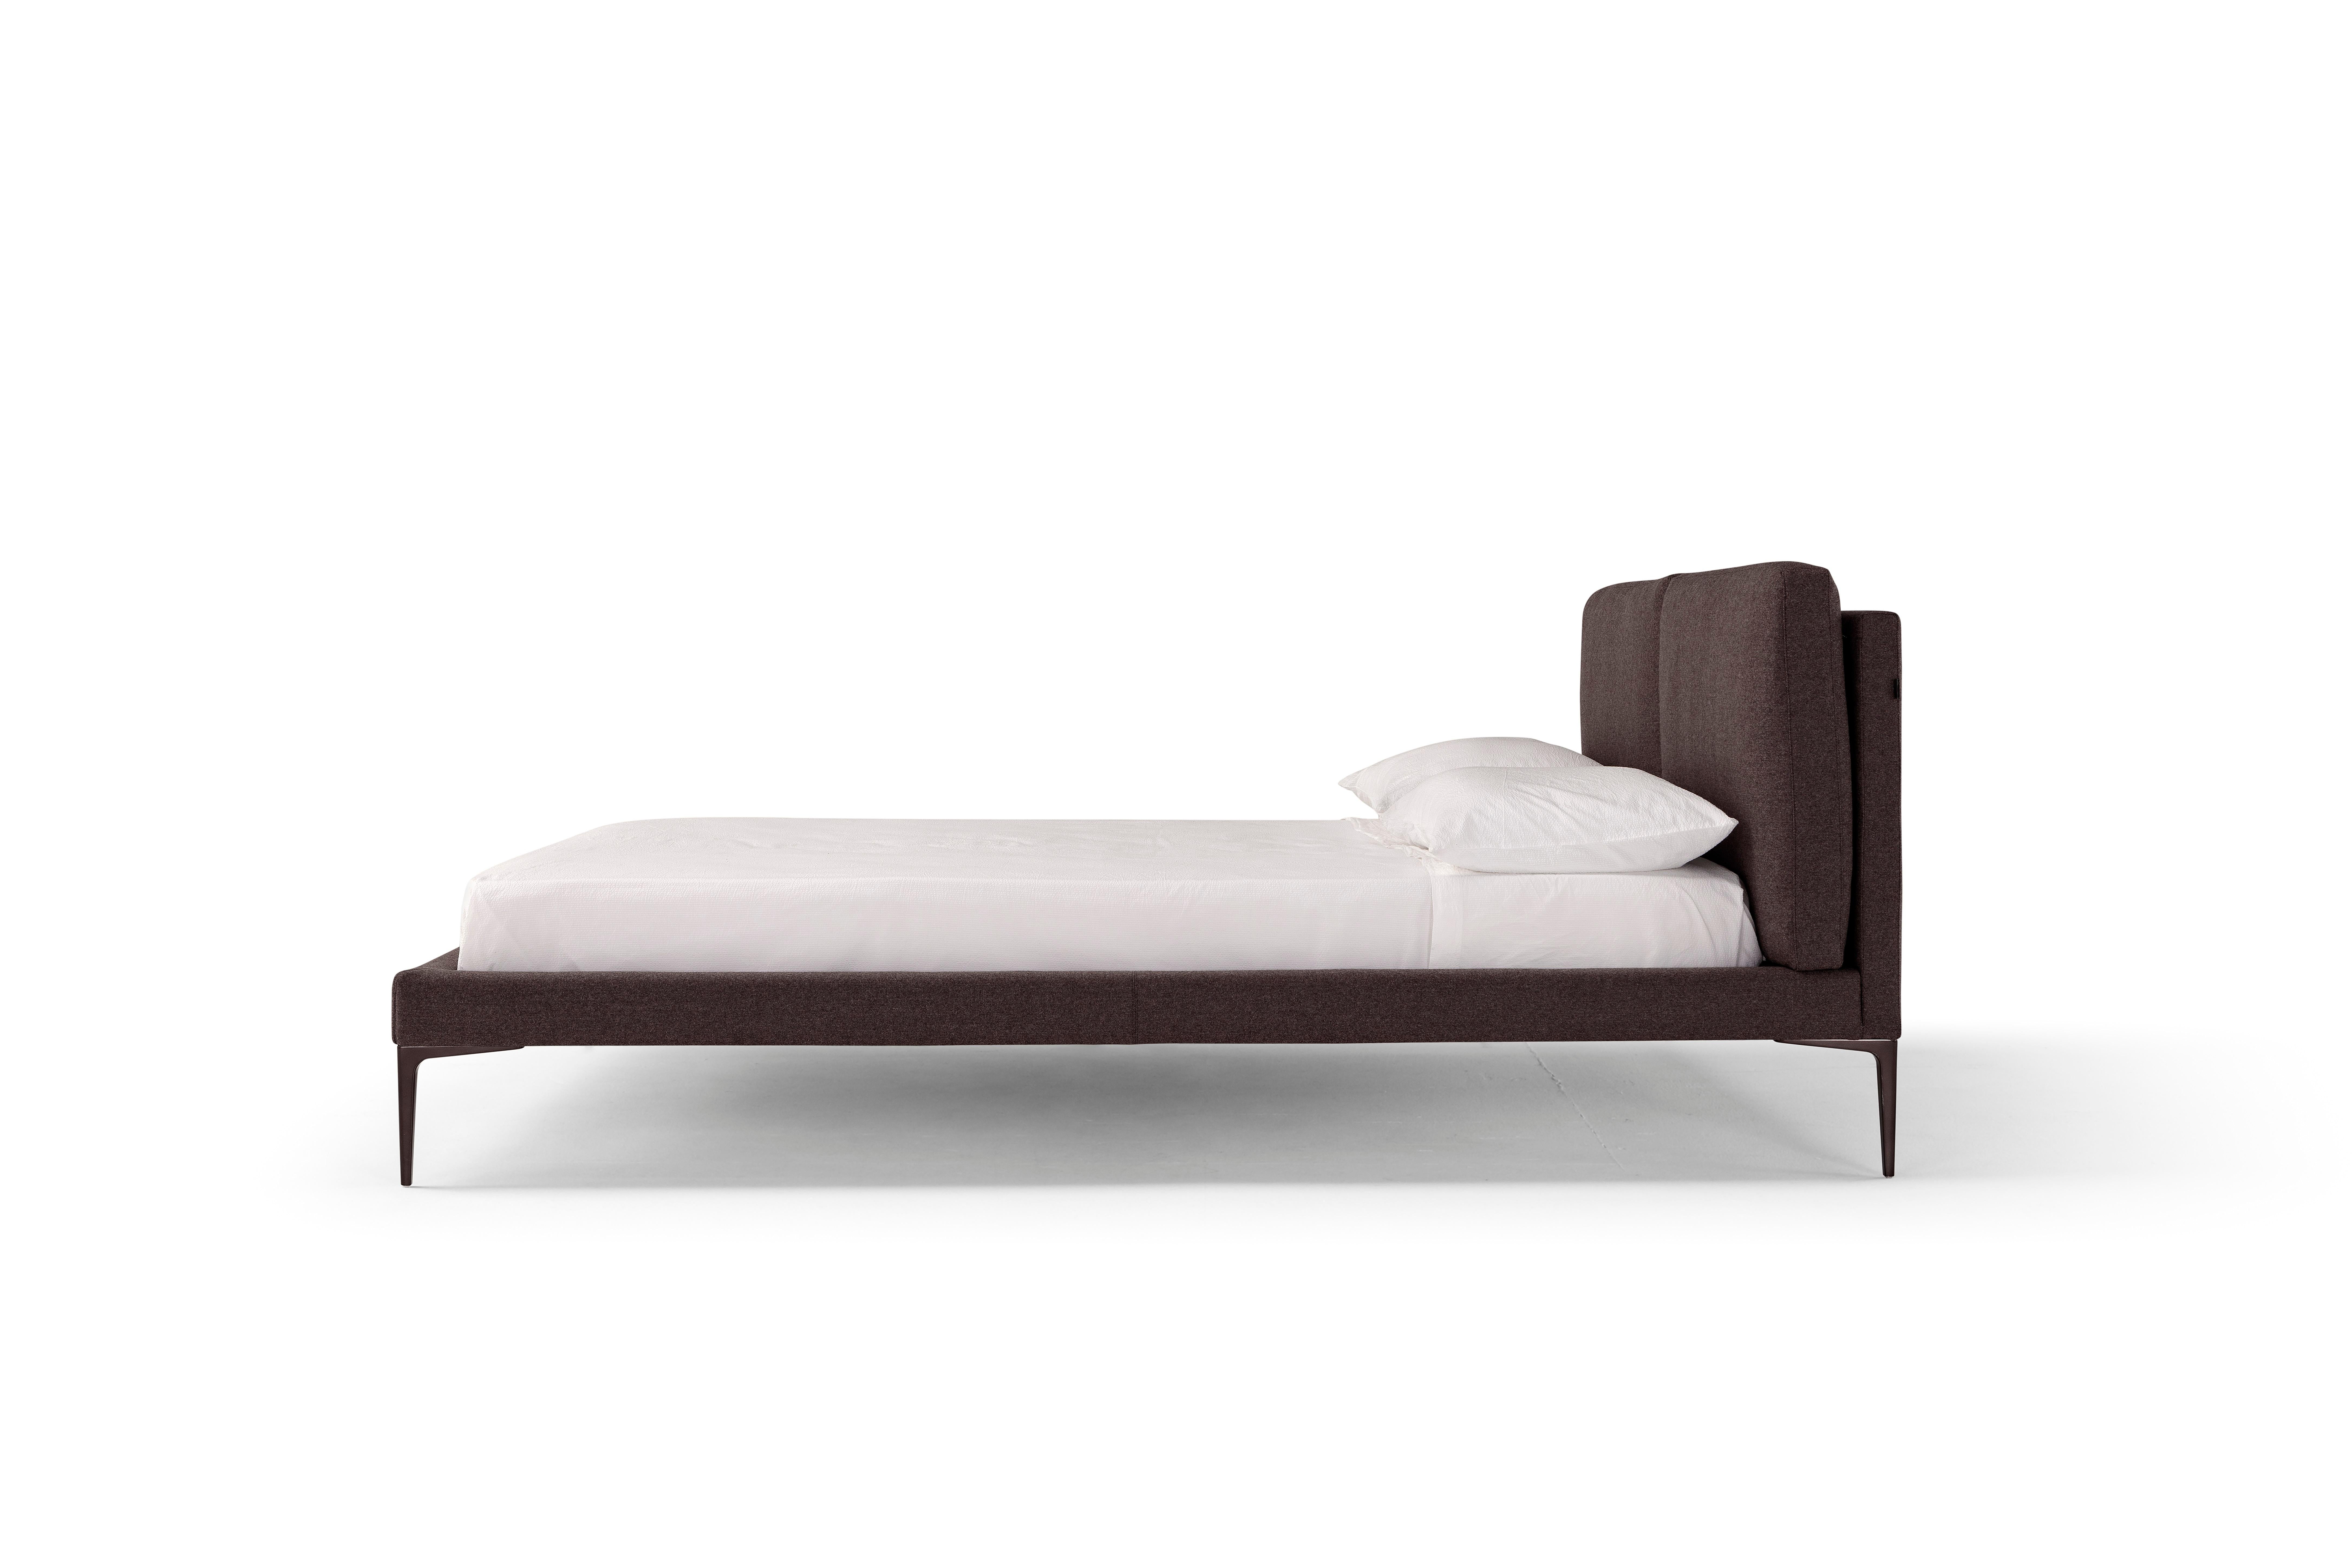 The upholstered bed Segno combines clean and safe lines with a welcoming and comfortable shape. It is rigorous in its lines that alternate right angles and curves, to improve the sense of softness and subsequently the sense of comfort of a sofa